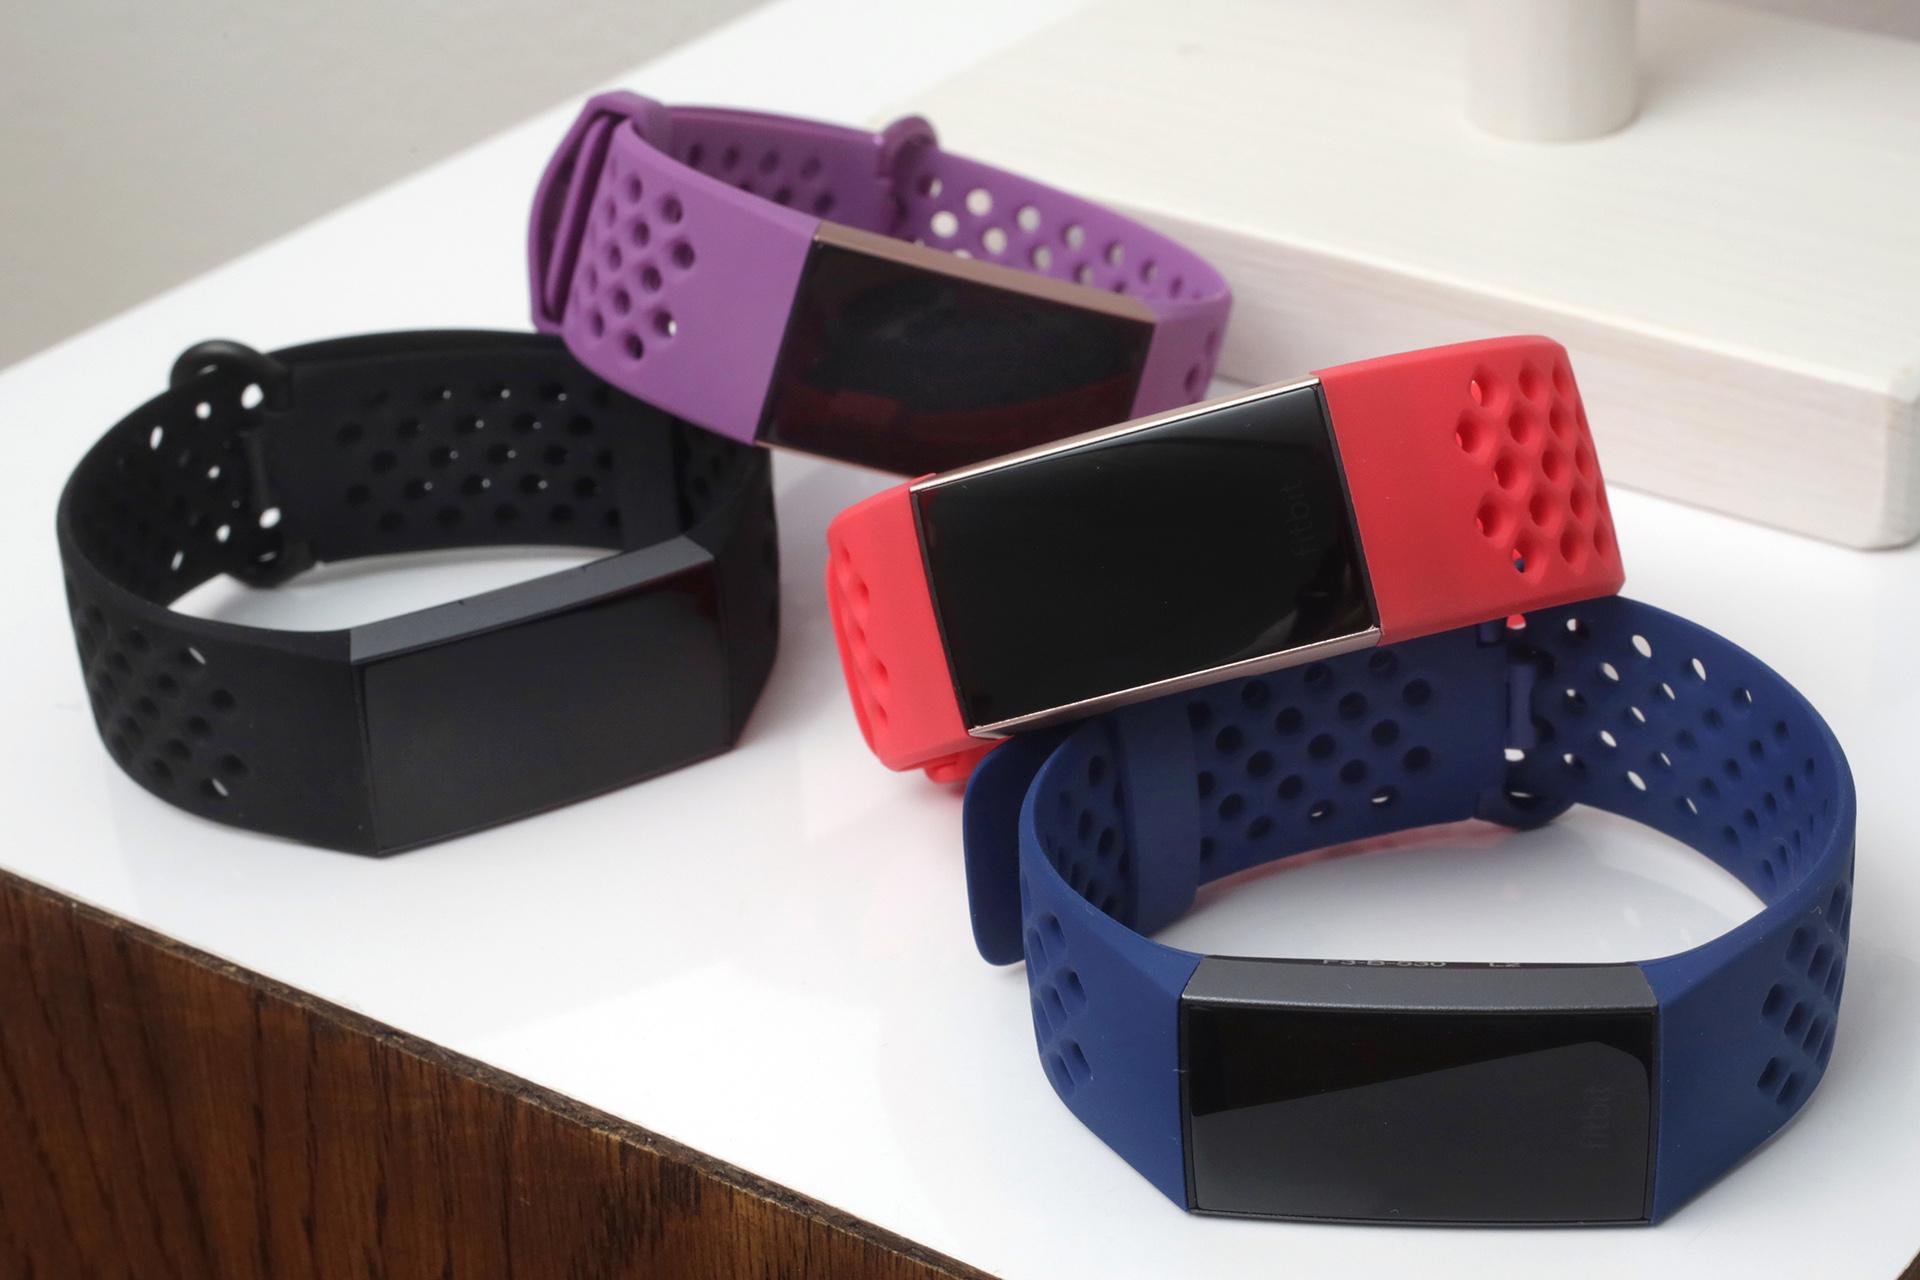 In this Aug. 16, 2018, file photo, the new Fitbit Charge 3 fitness trackers with sport bands are displayed in New York. (AP Photo / Richard Drew, File)